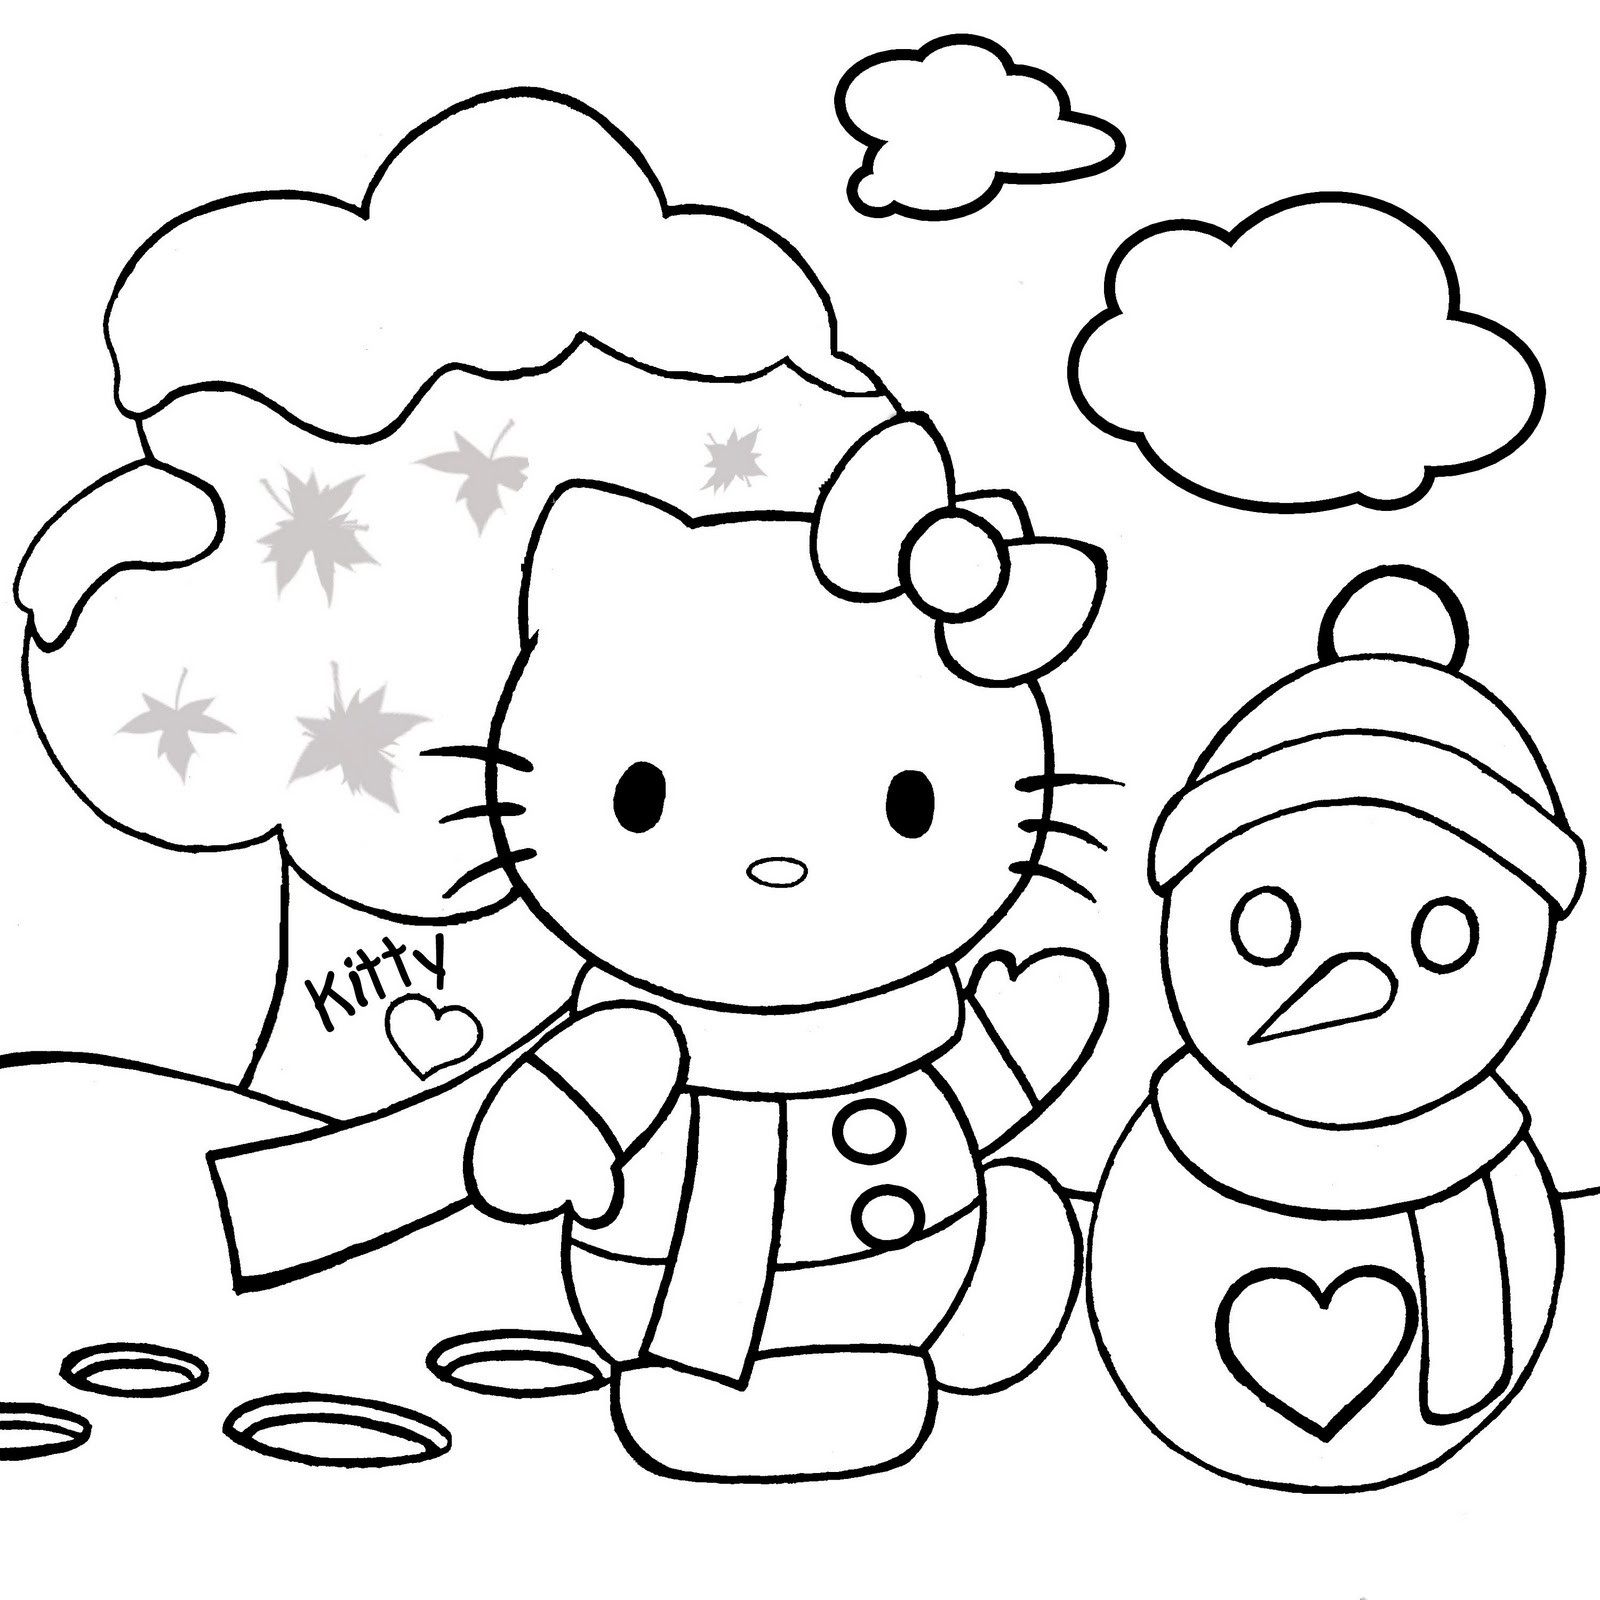 Hello Kitty Coloring Pages For Kids
 Hello Kitty Christmas Coloring Pages 1